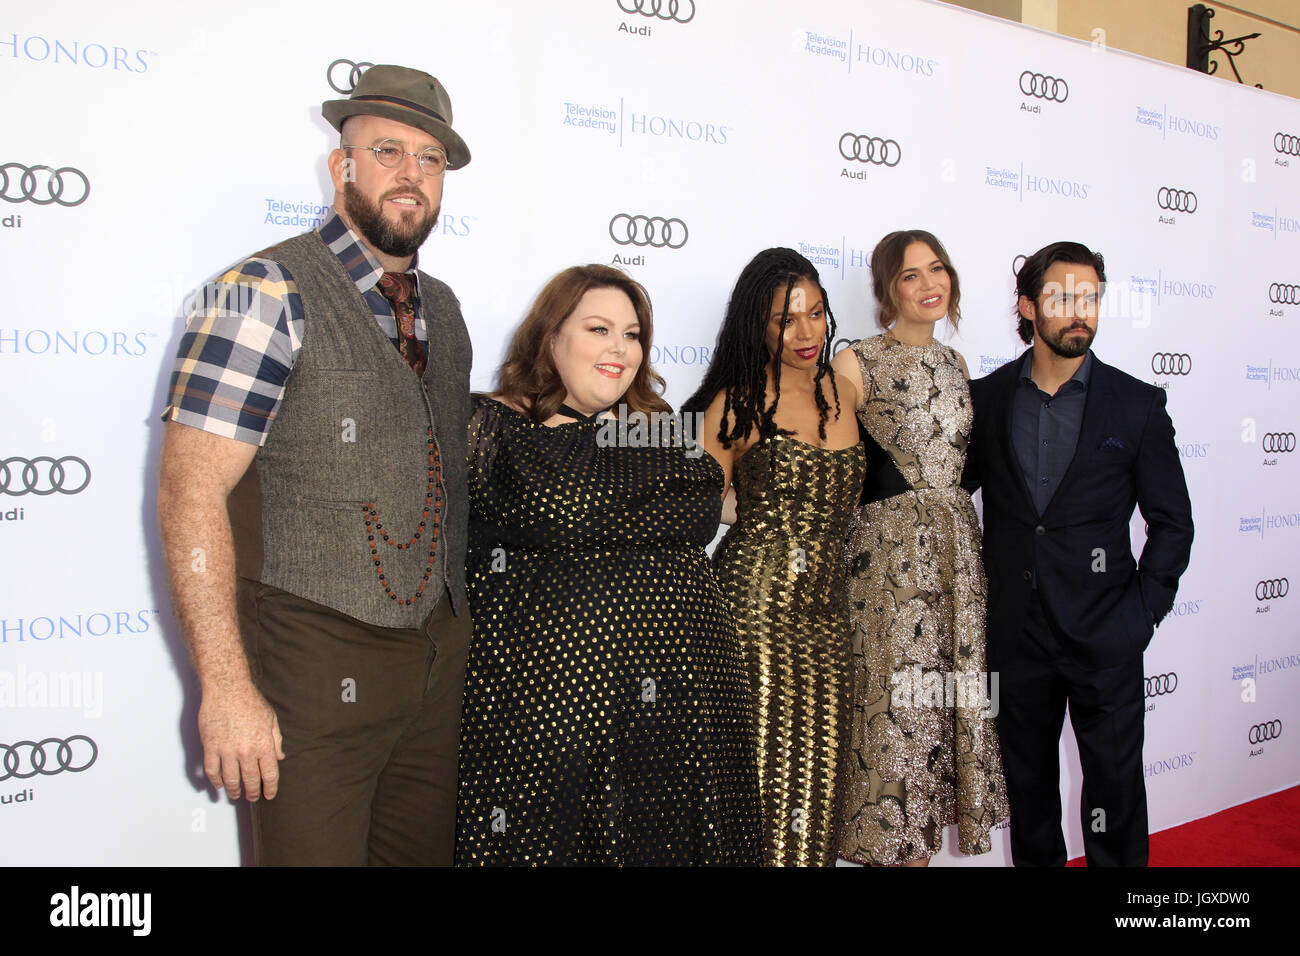 10th Annual Television Academy Honors at the Montage Hotel - Arrivals  Featuring: Chris Sullivan, Chrissy Metz, Susan Kelechi Watson, Mandy Moore, Milo Ventimiglia Where: Beverly Hills, California, United States When: 08 Jun 2017 Credit: Nicky Nelson/WENN.com Stock Photo